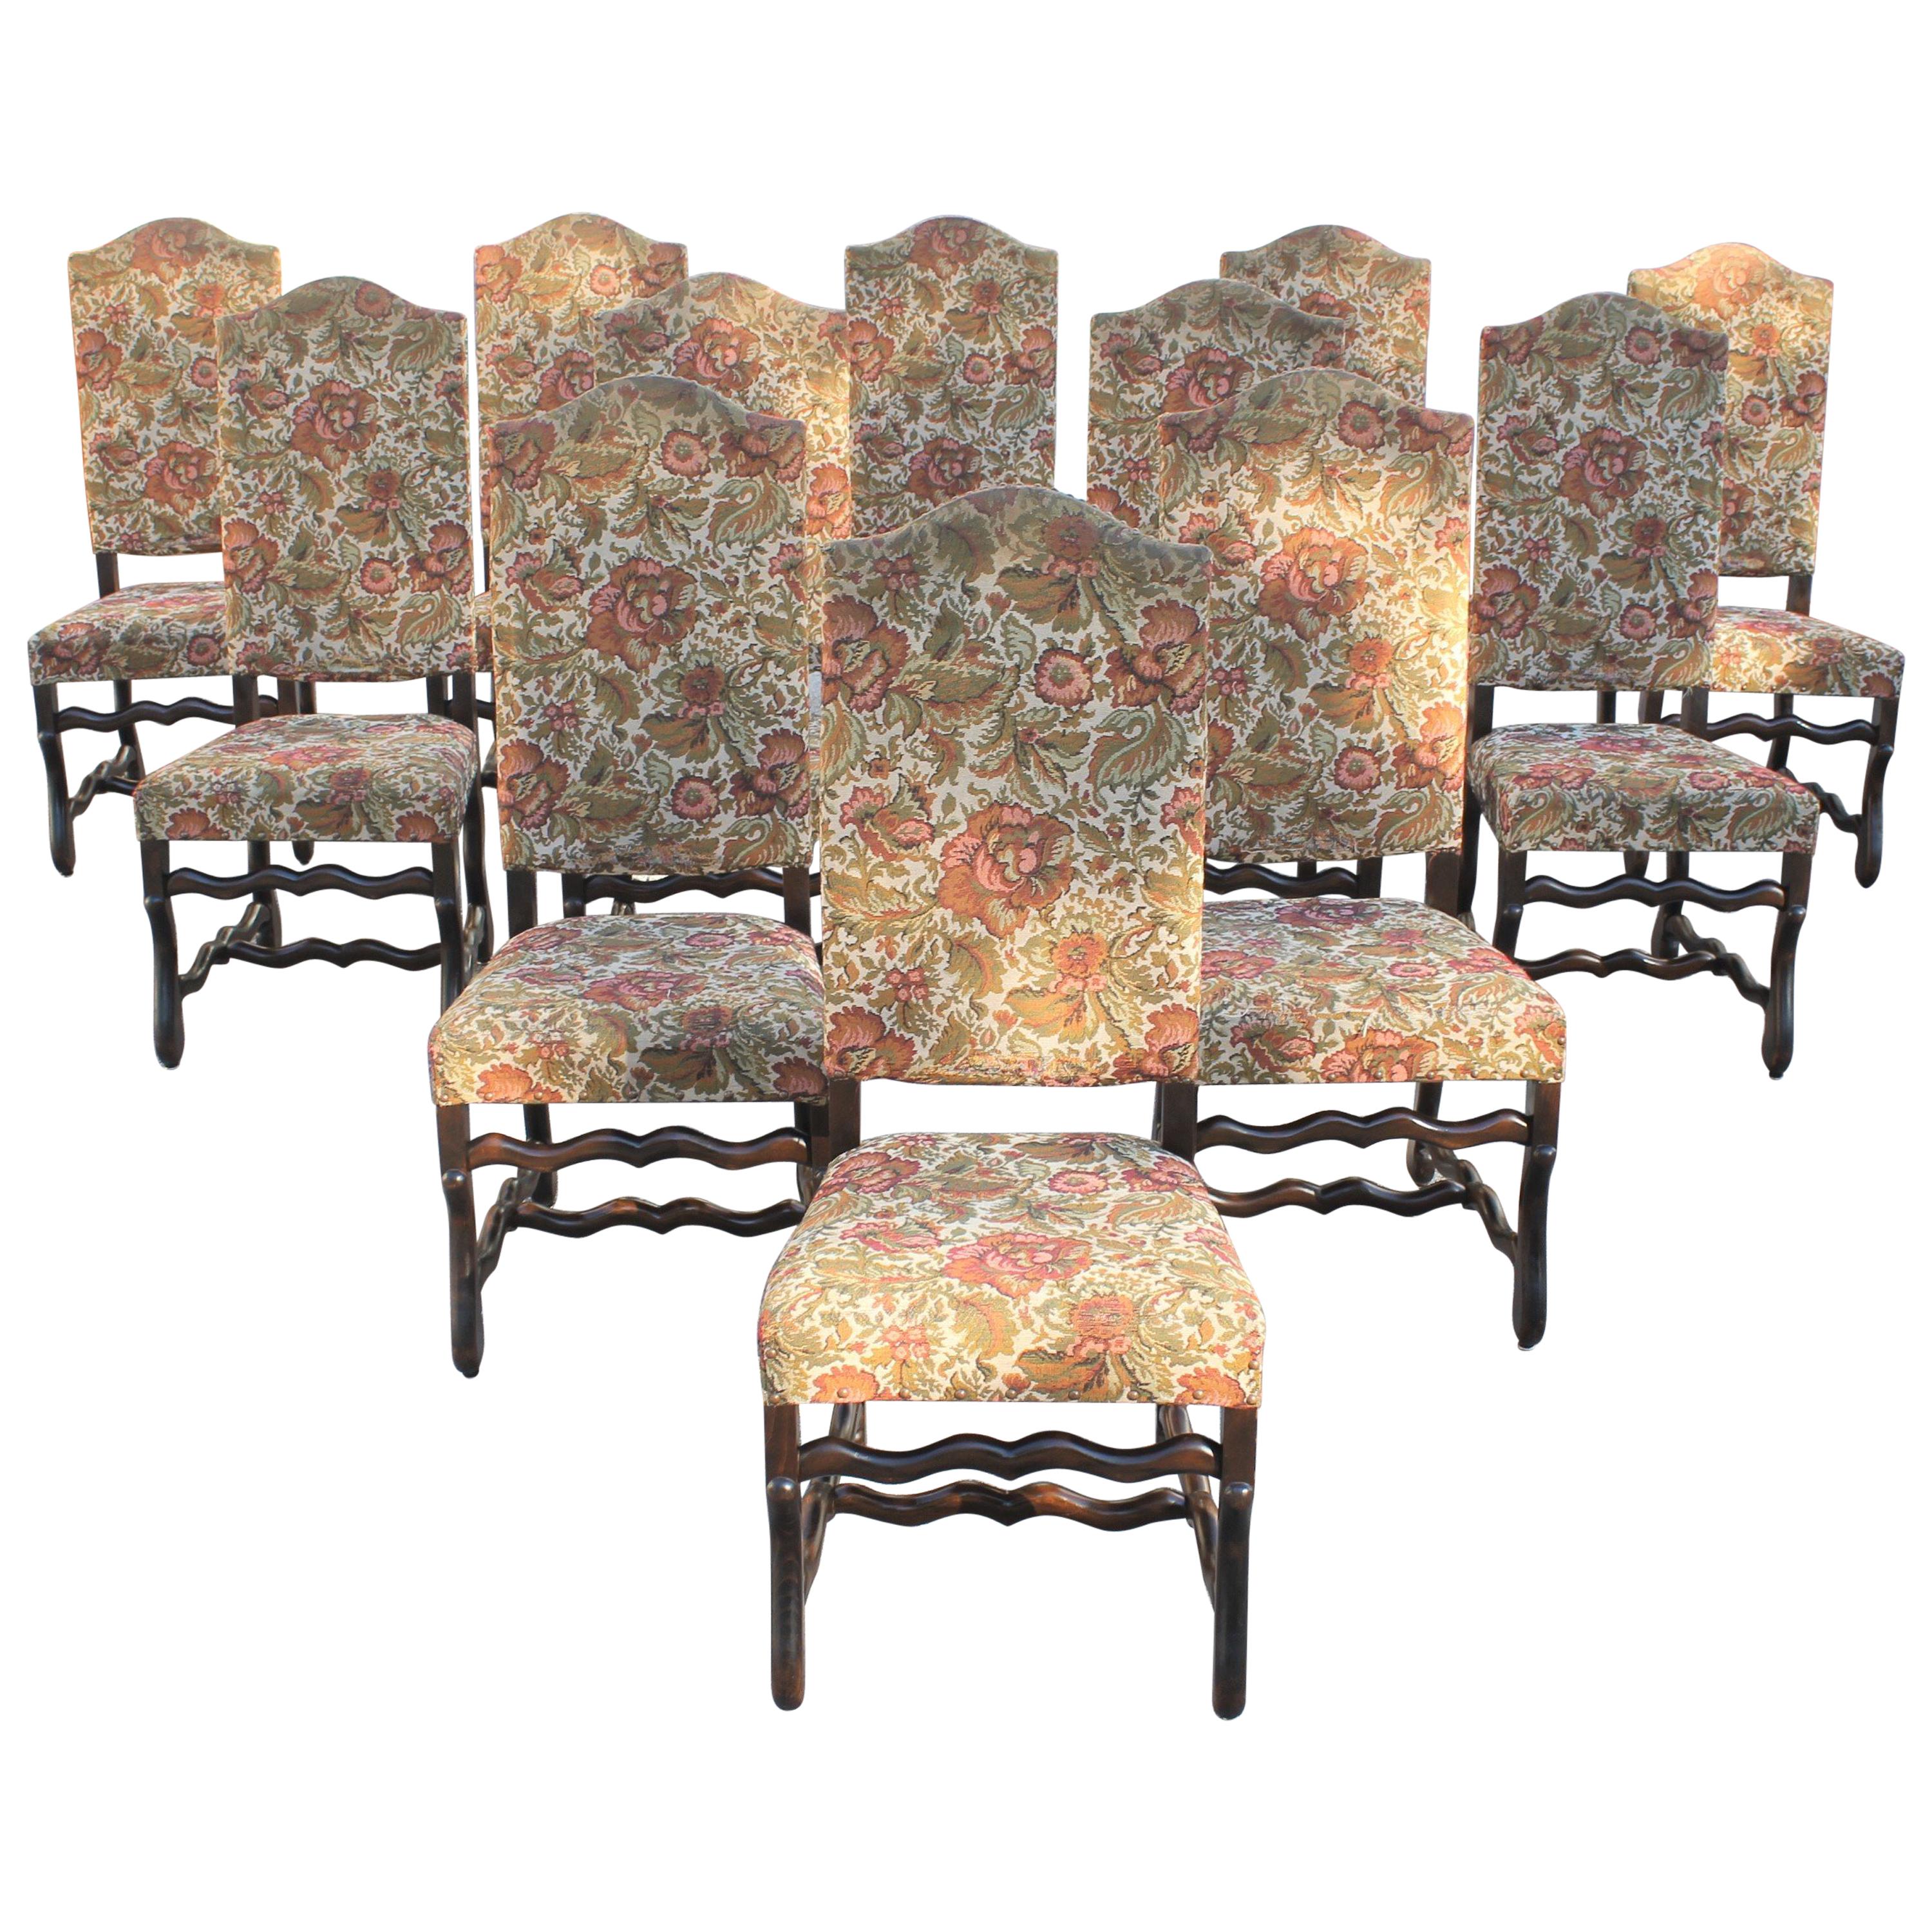 Set of 12 French Louis XIII Style Os De Mouton Dining Chairs 1900 Th Century. 